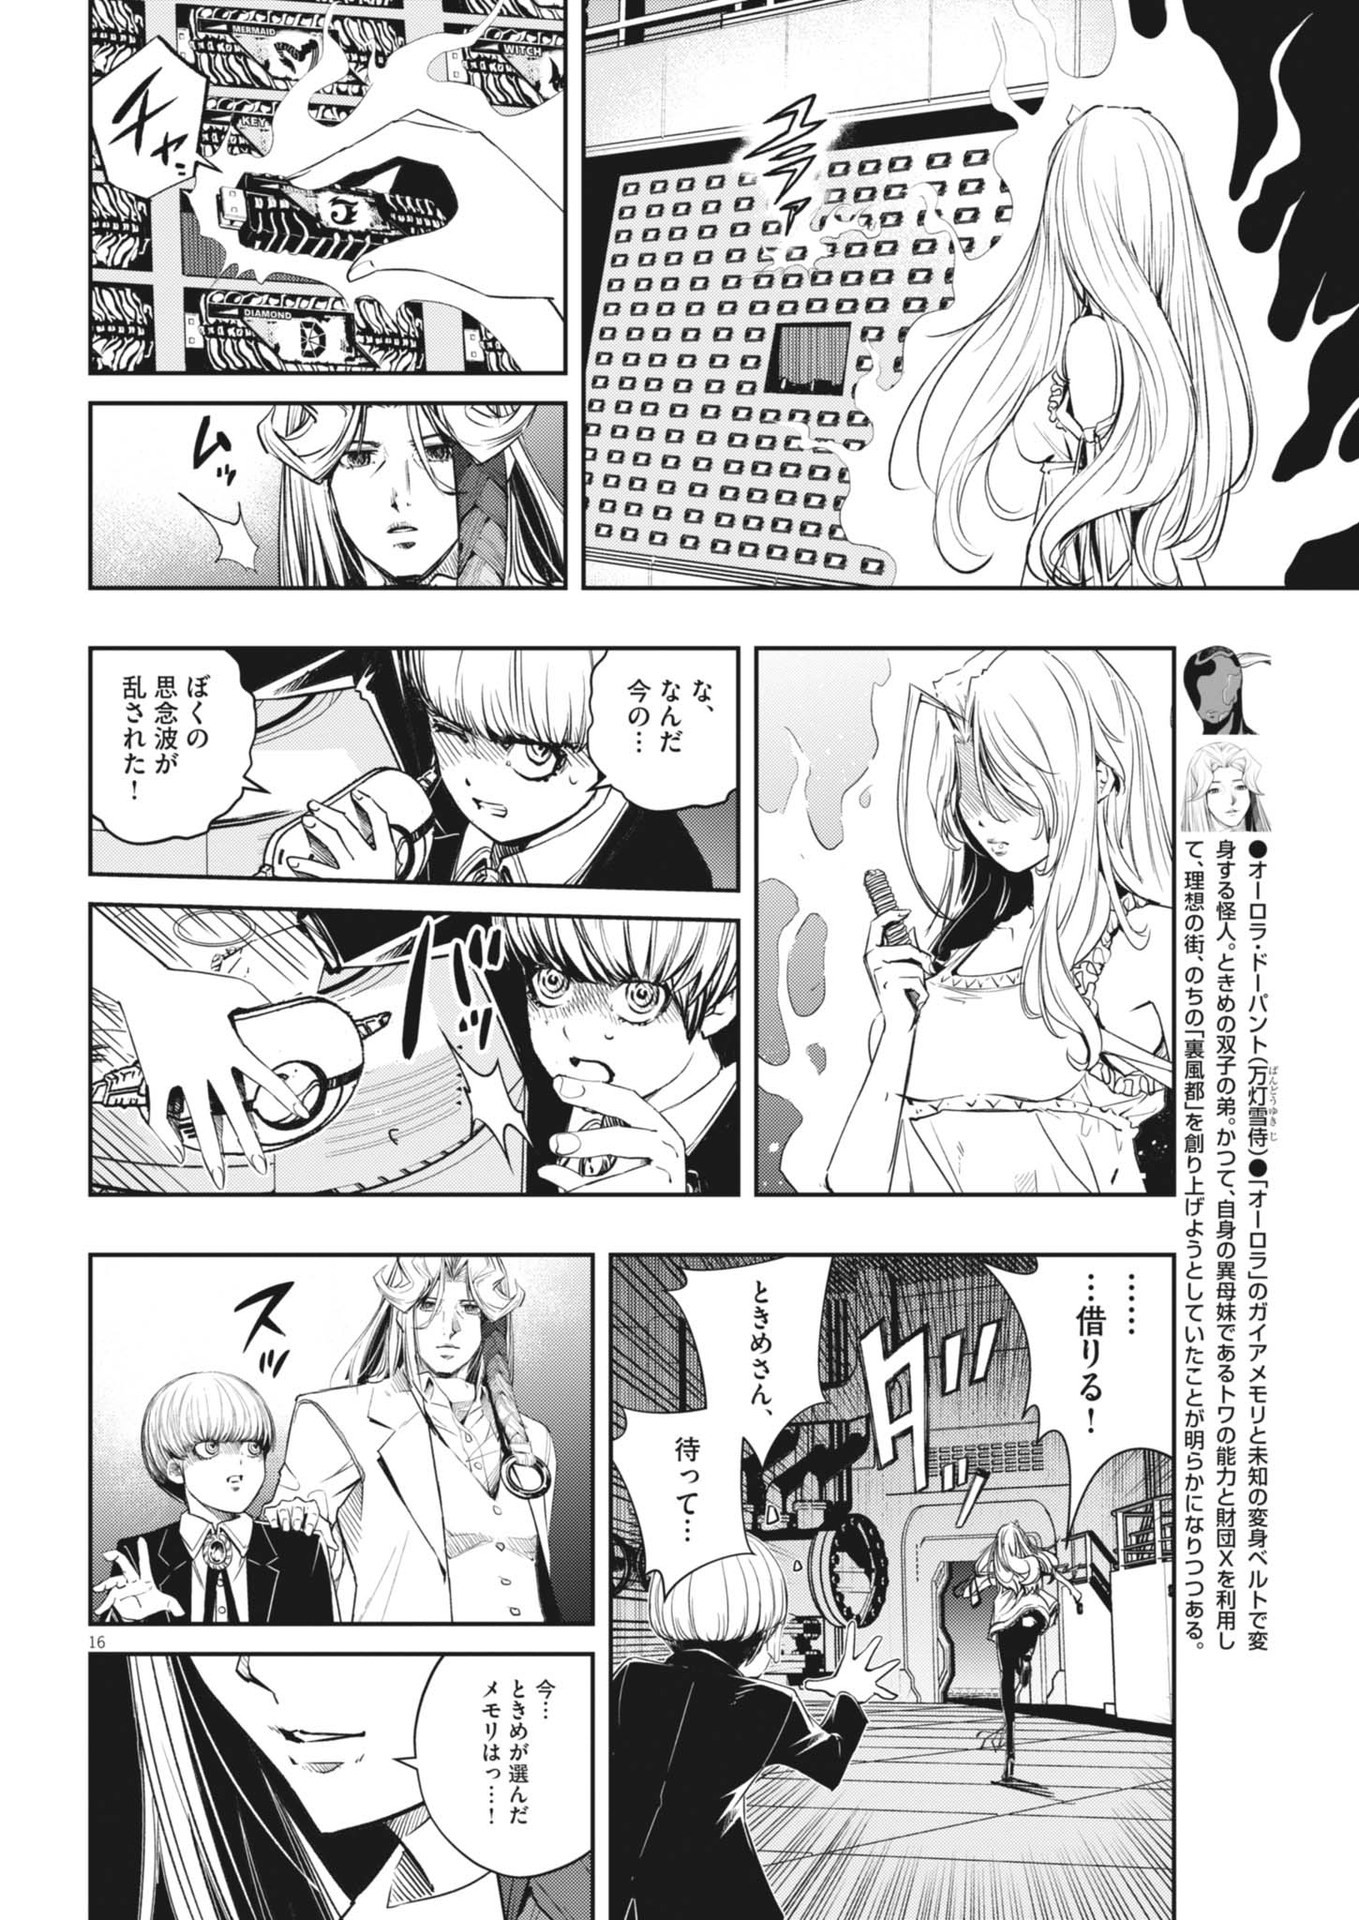 Kamen Rider W: Fuuto Tantei - Chapter 148 - Page 17